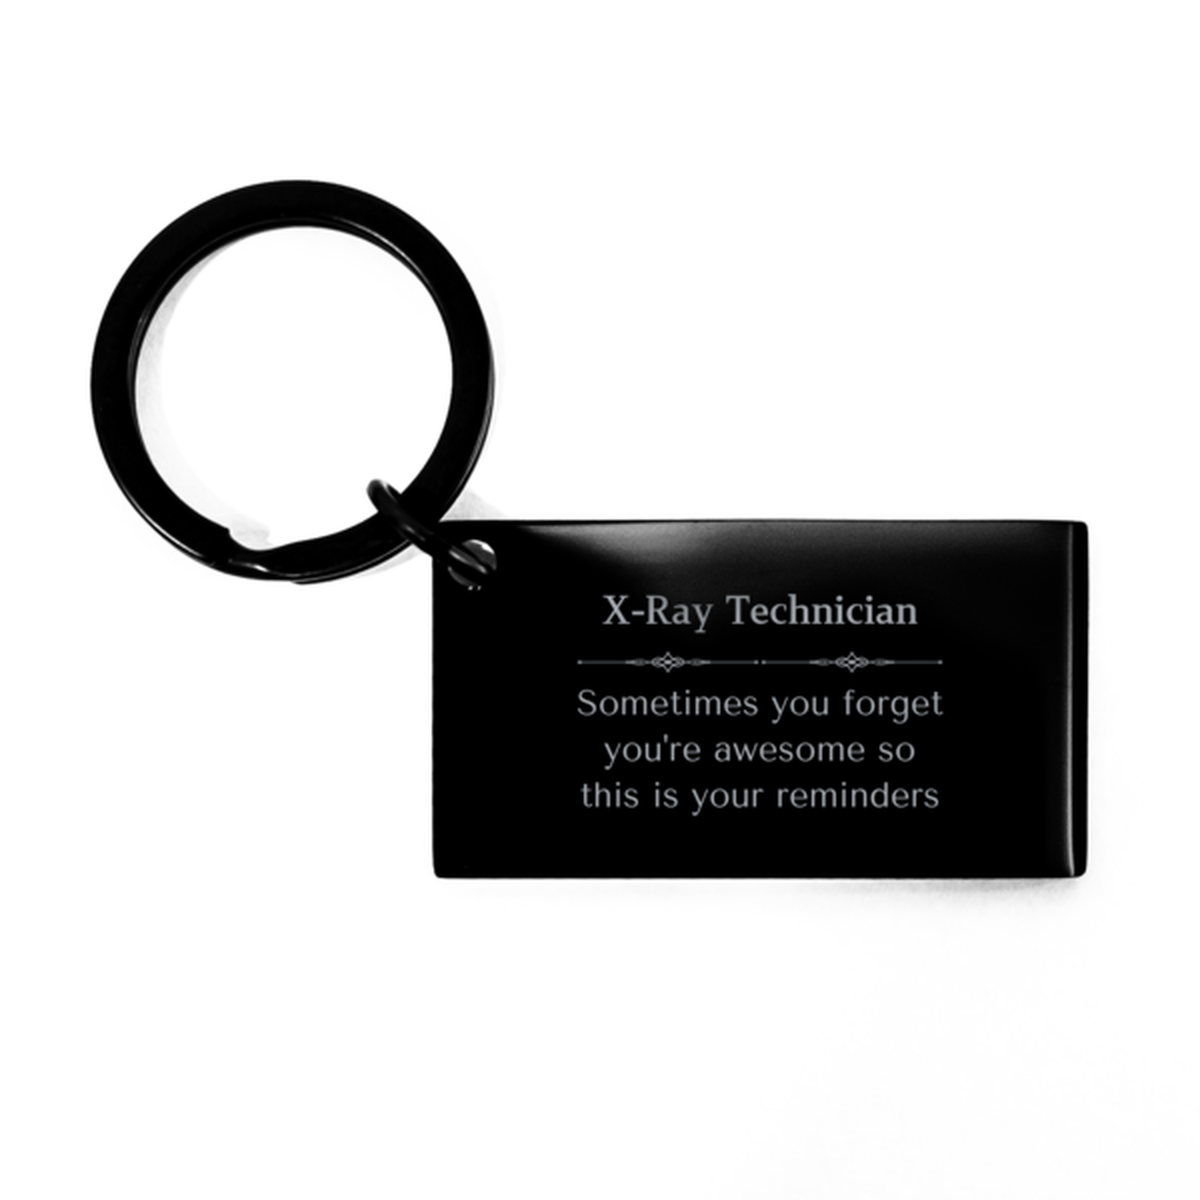 Sentimental X-Ray Technician Keychain, Auditor Sometimes you forget you're awesome so this is your reminders, Graduation Christmas Birthday Gifts for X-Ray Technician, Men, Women, Coworkers